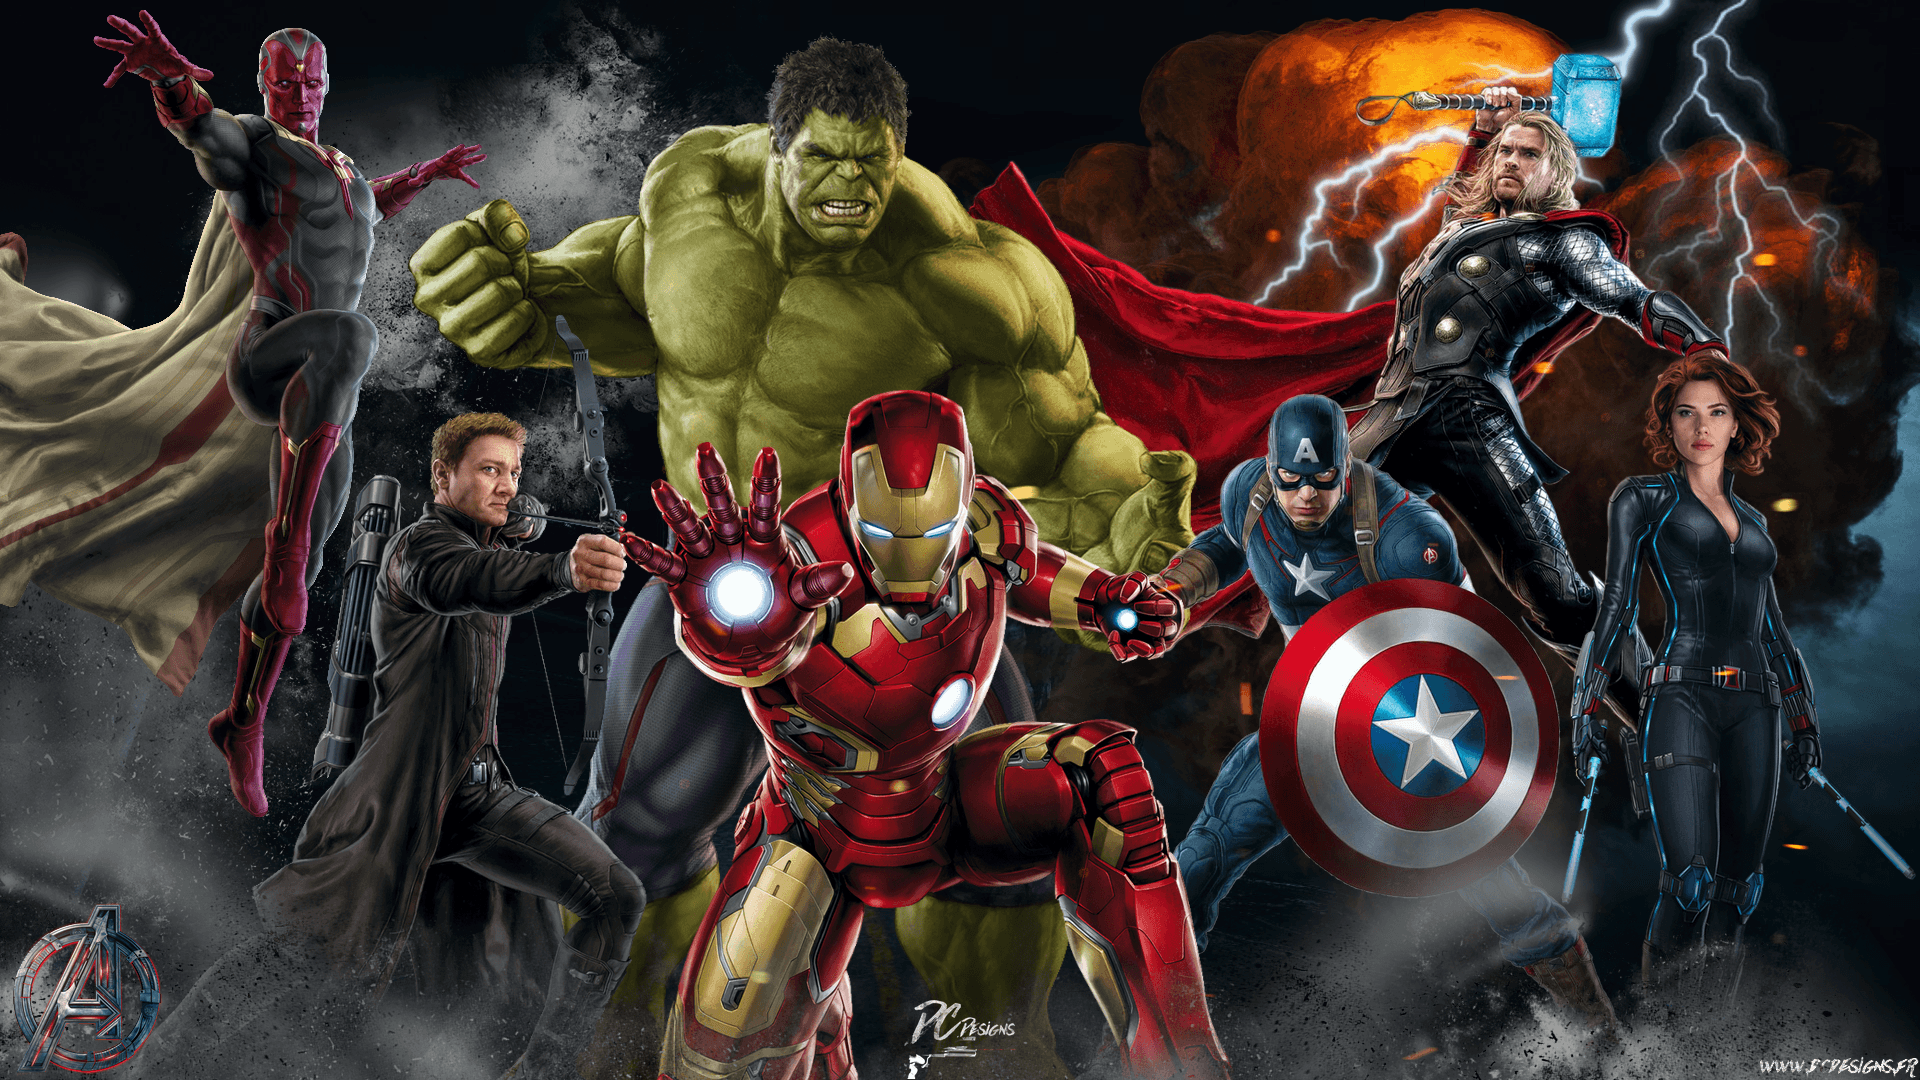 Avengers Wallpaper, Background, Image, Picture. Design